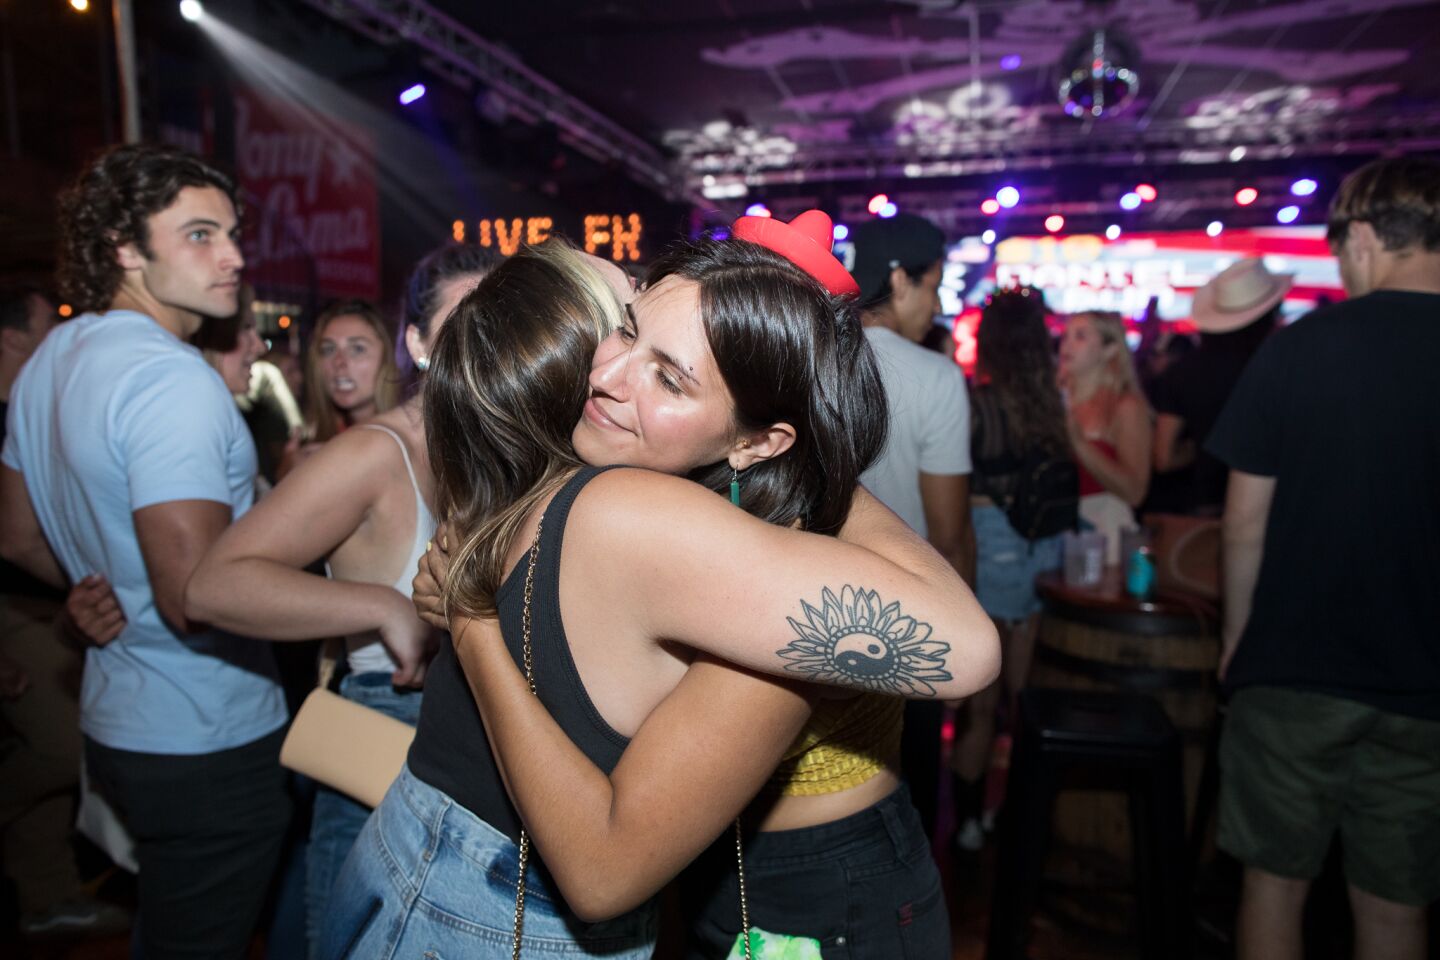 San Diego came back to life on California's reopening day with Moonshine Beach's Restart Party, which aimed to make up for lost time and celebrate every holiday missed in 2020, on Tuesday, June 15, 2021.